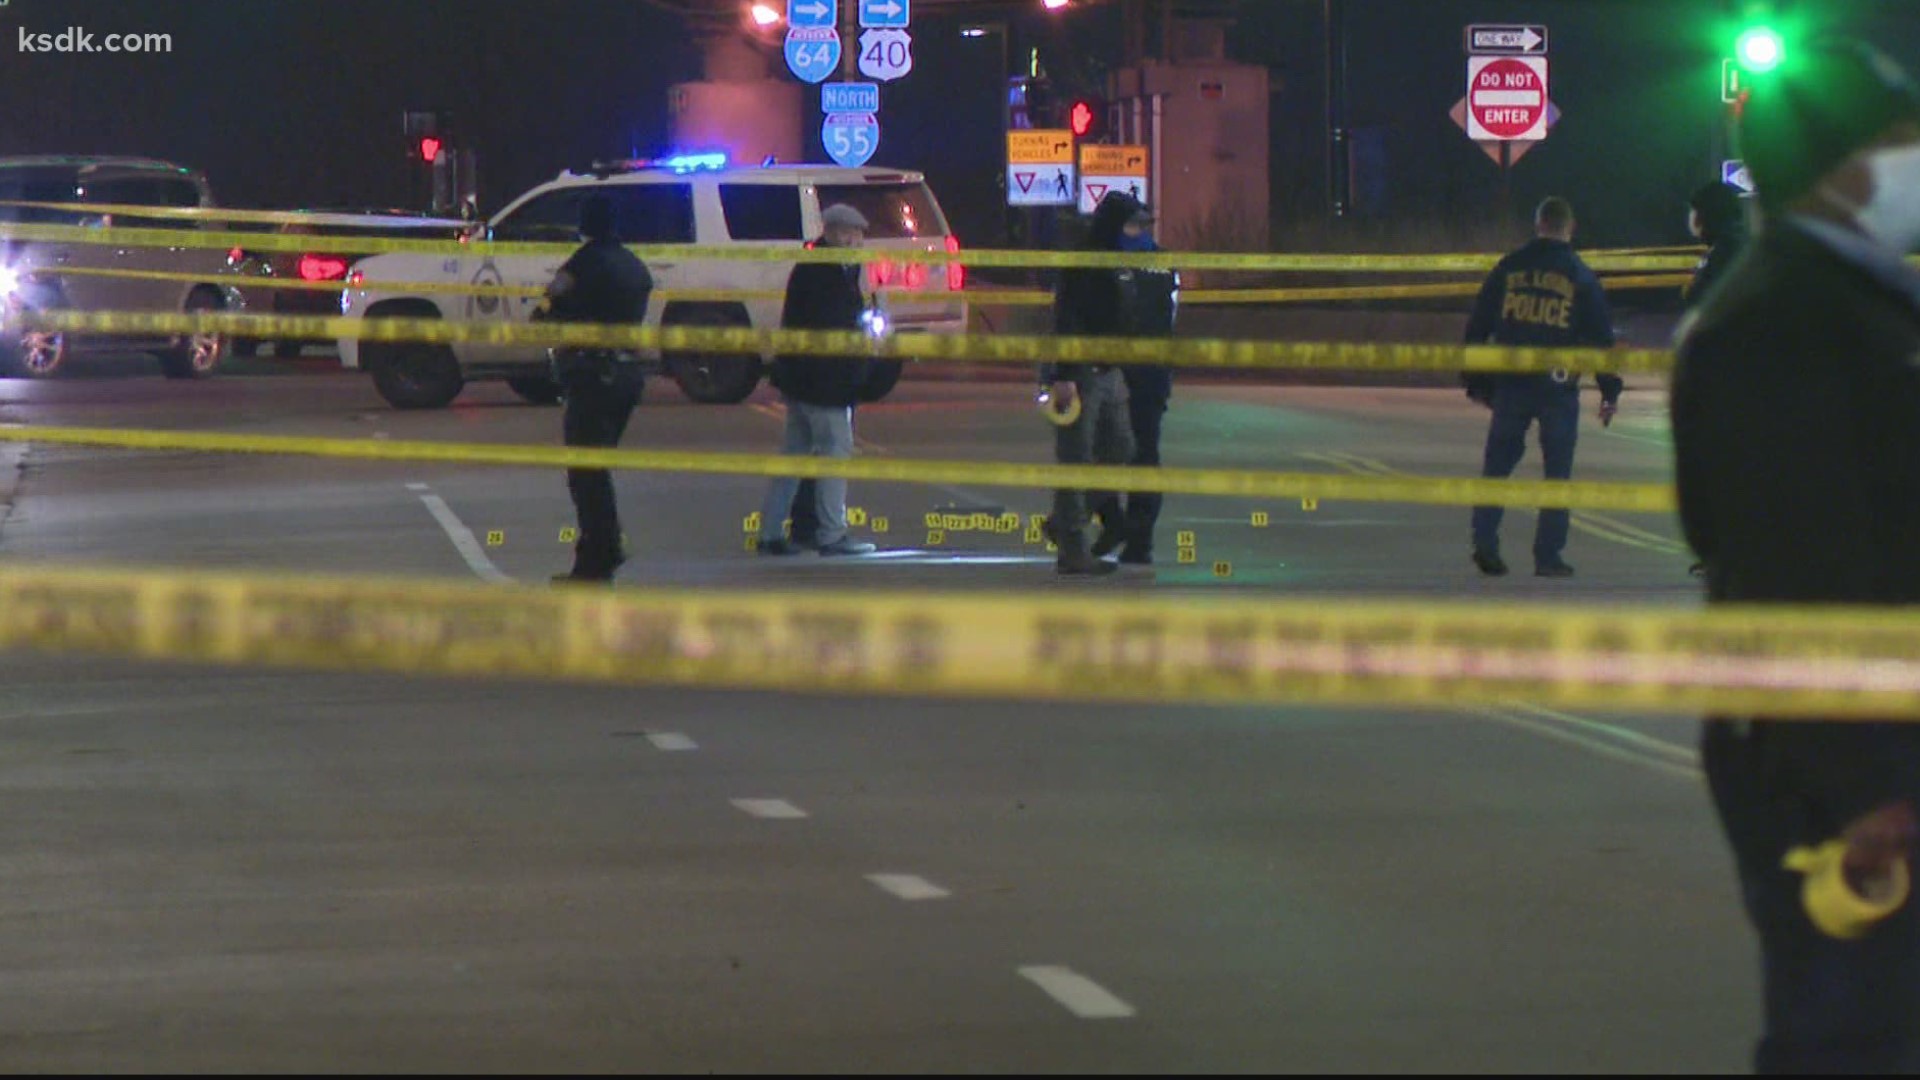 Police said the shooting happened near the intersection of Washington Avenue and 6th Street at around 9:25.